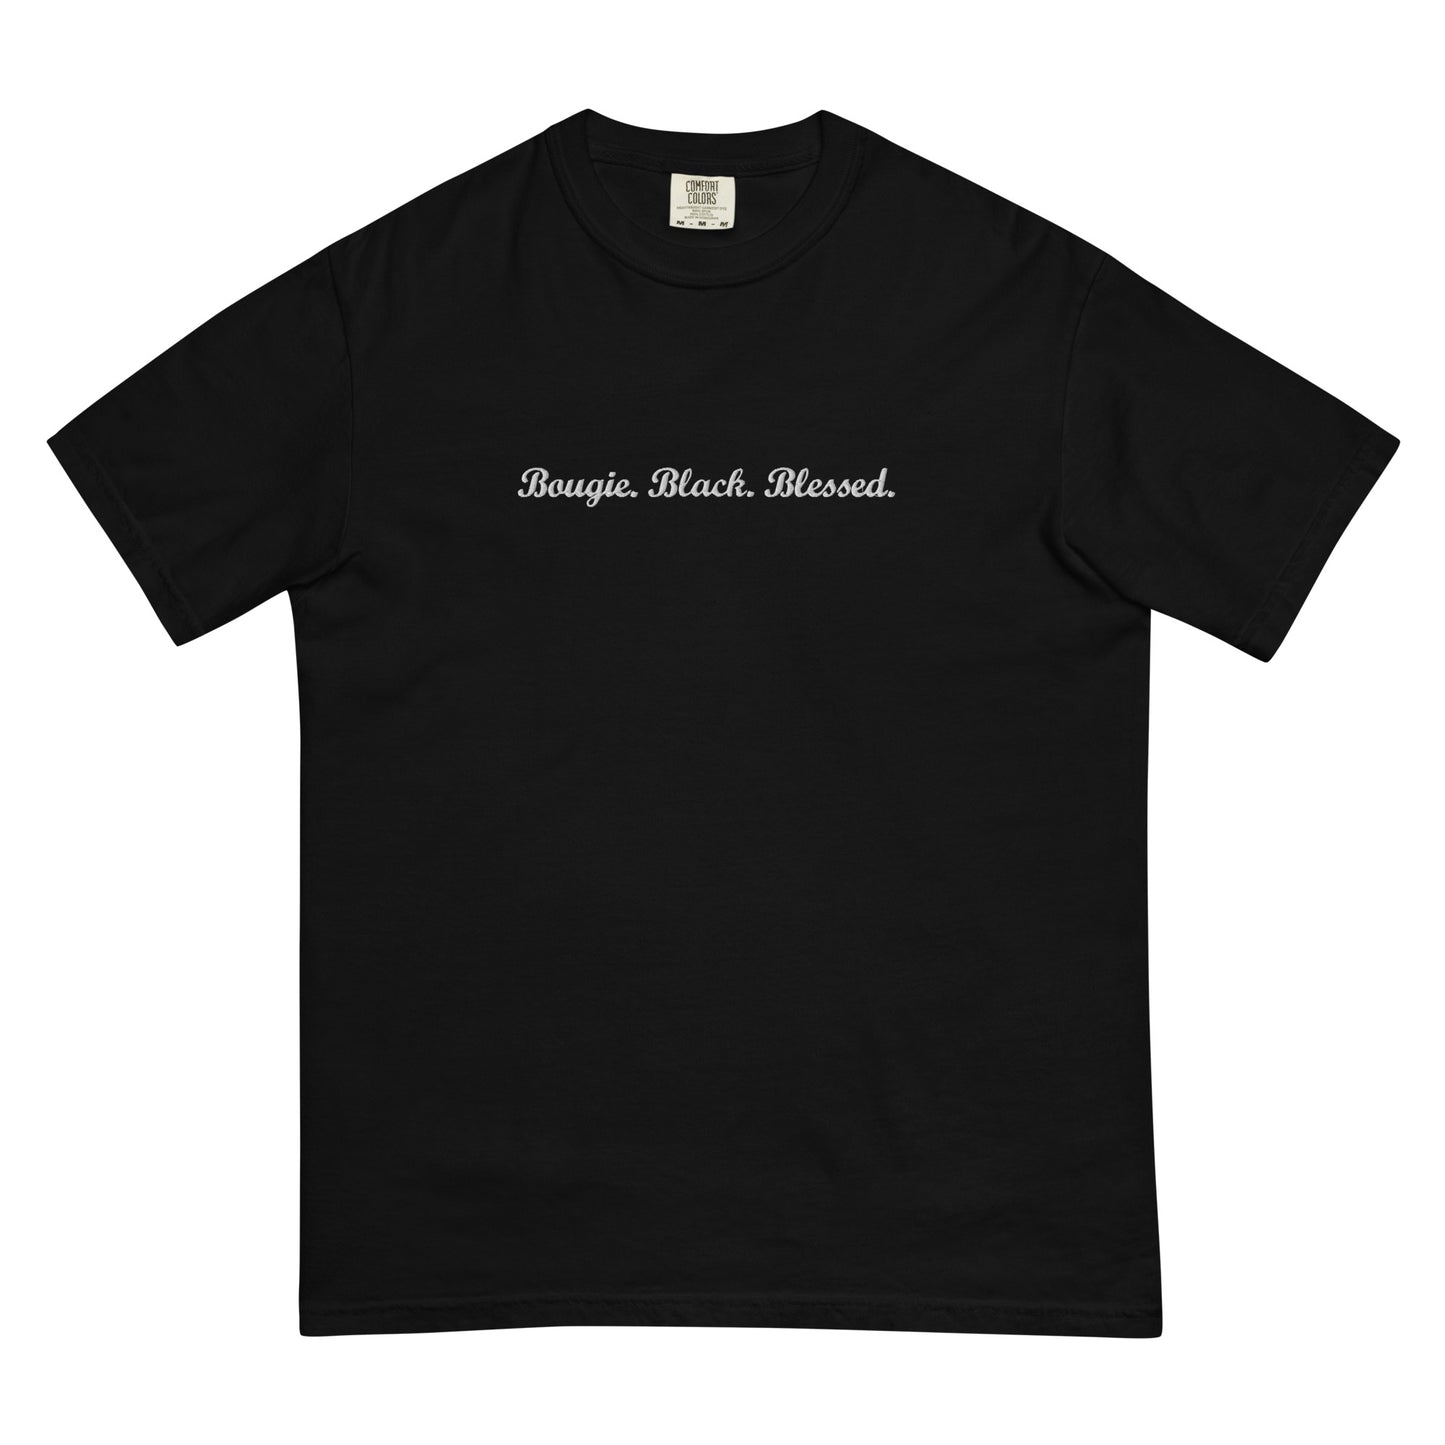 Bougie. Black. Blessed. T-shirt with Embroidered White Text